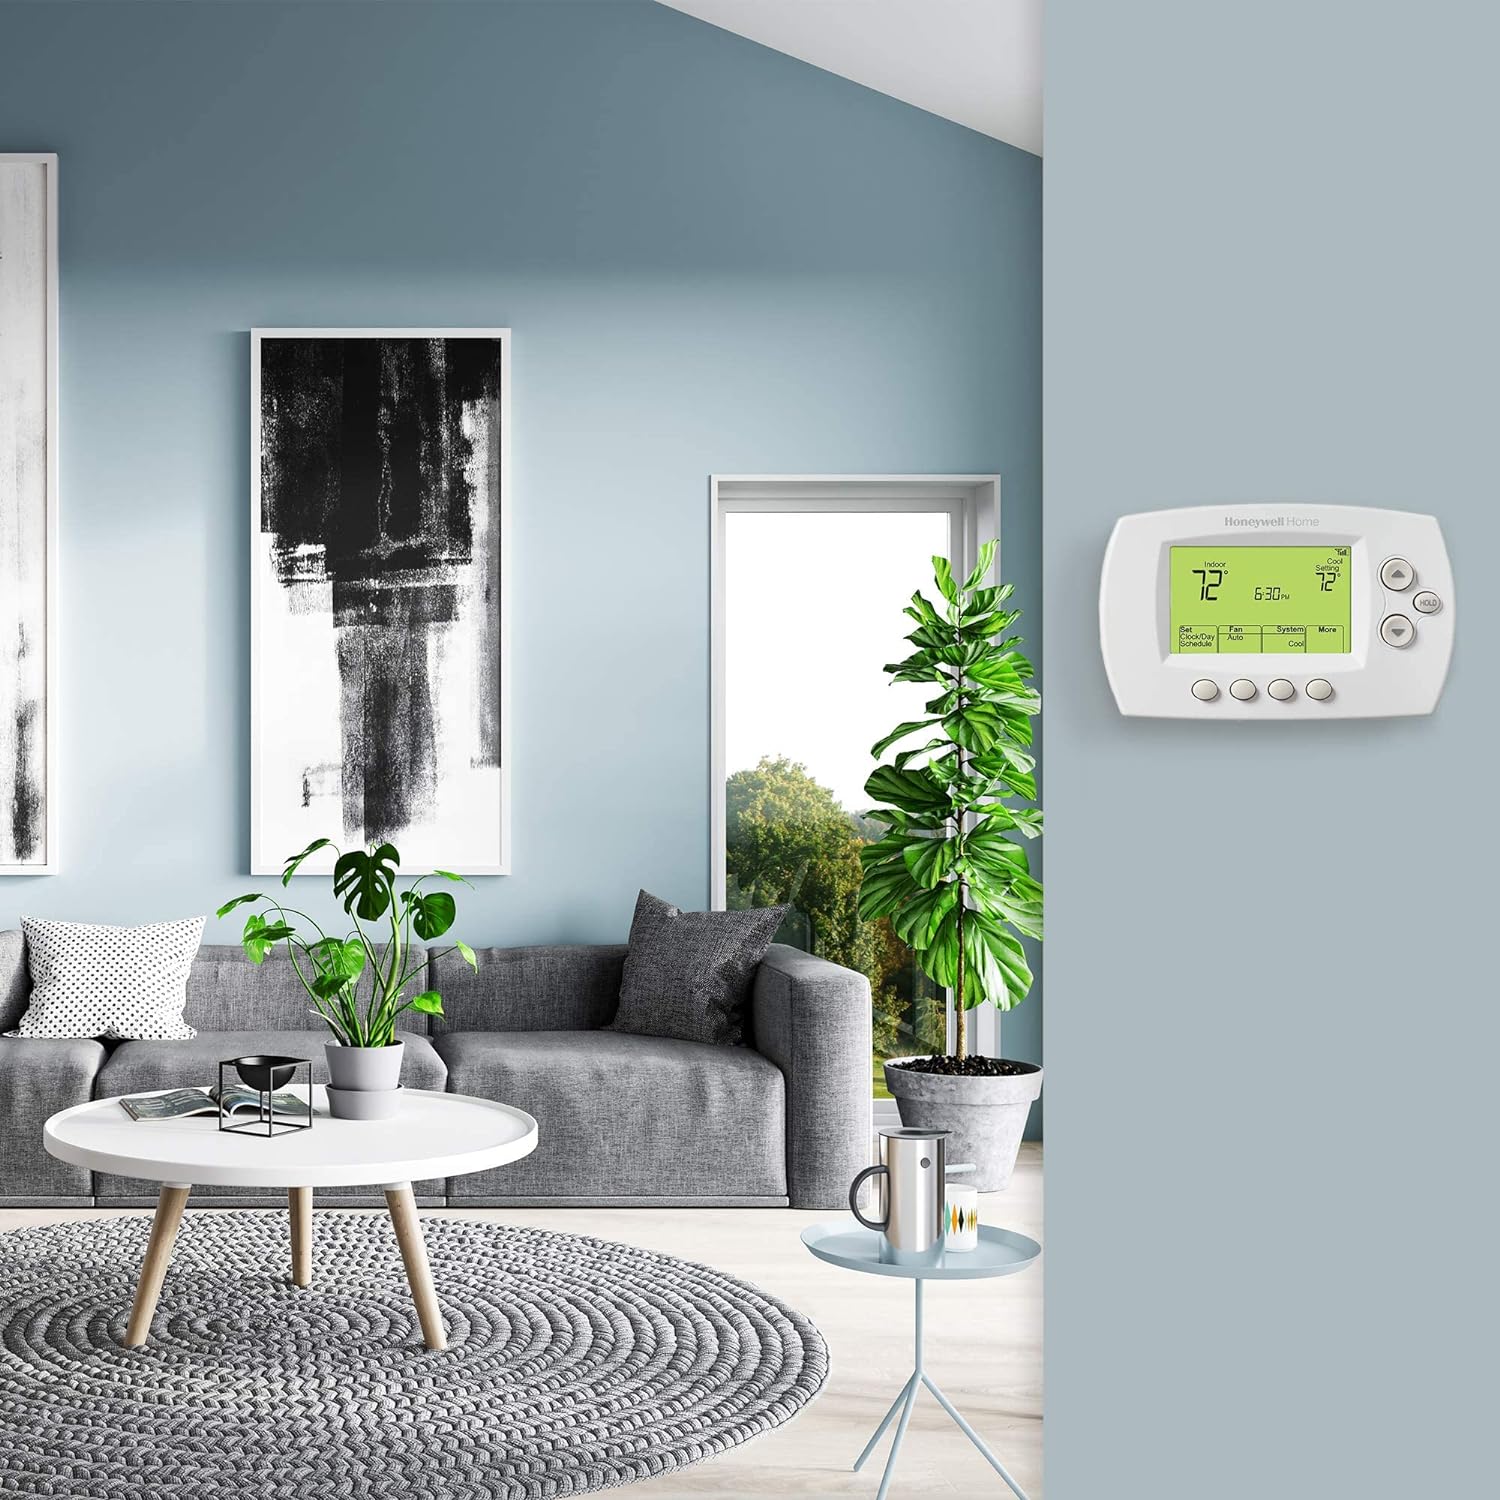 Honeywell Wi-Fi 7-Day Programmable Thermostat (RTH6580WF), Requires C Wire, Works with Alexa